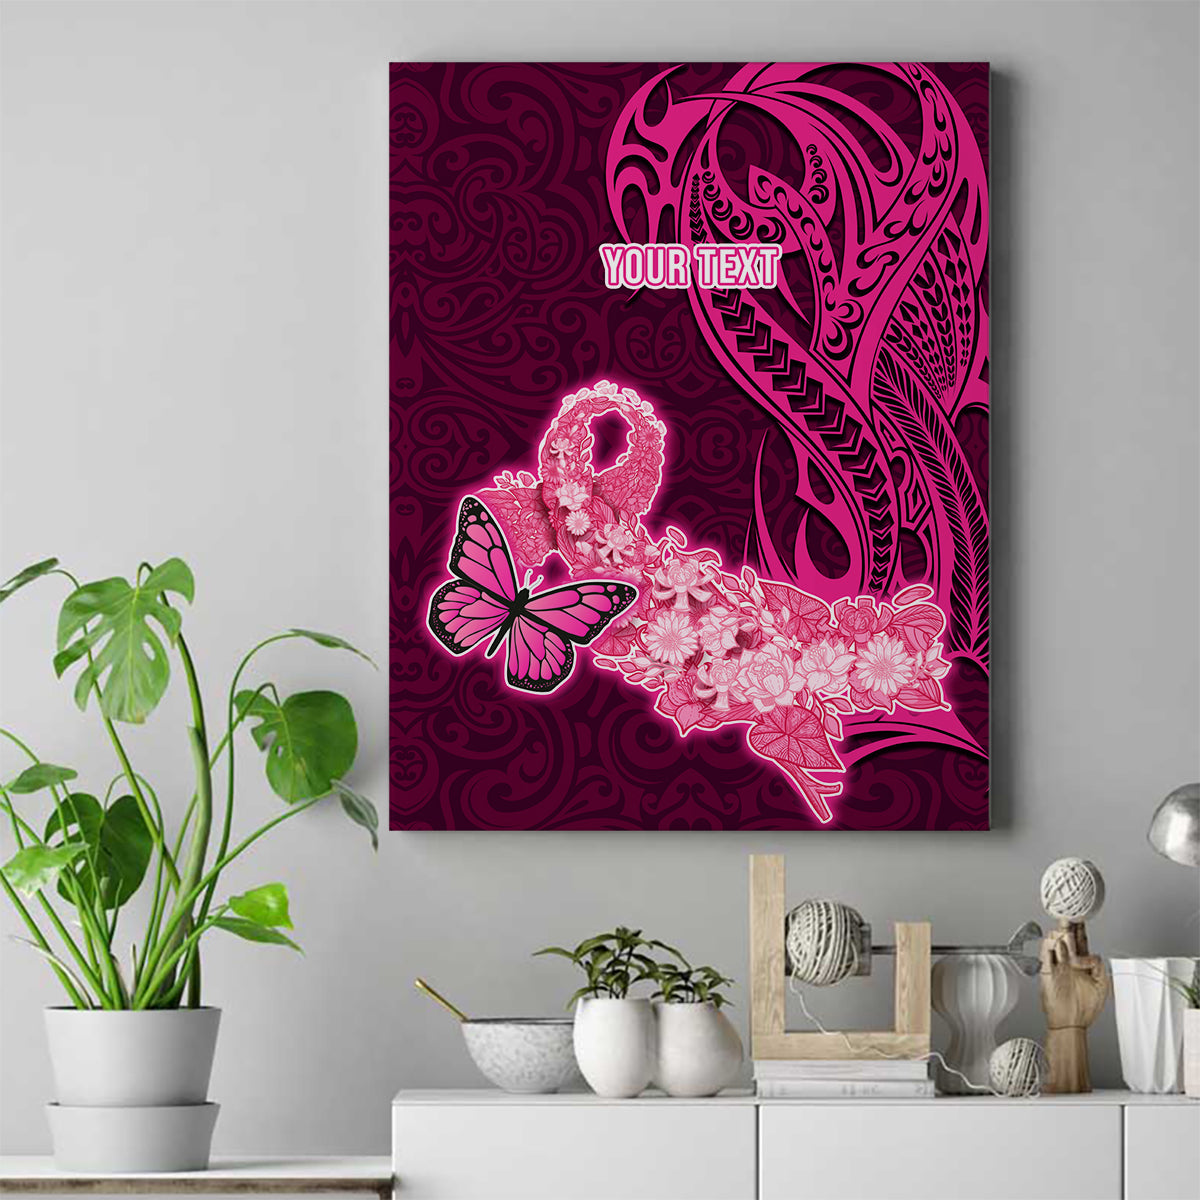 Custom Polynesia Breast Cancer Canvas Wall Art Butterfly and Flowers Ribbon Maori Tattoo Ethnic Pink Style LT03 Pink - Polynesian Pride